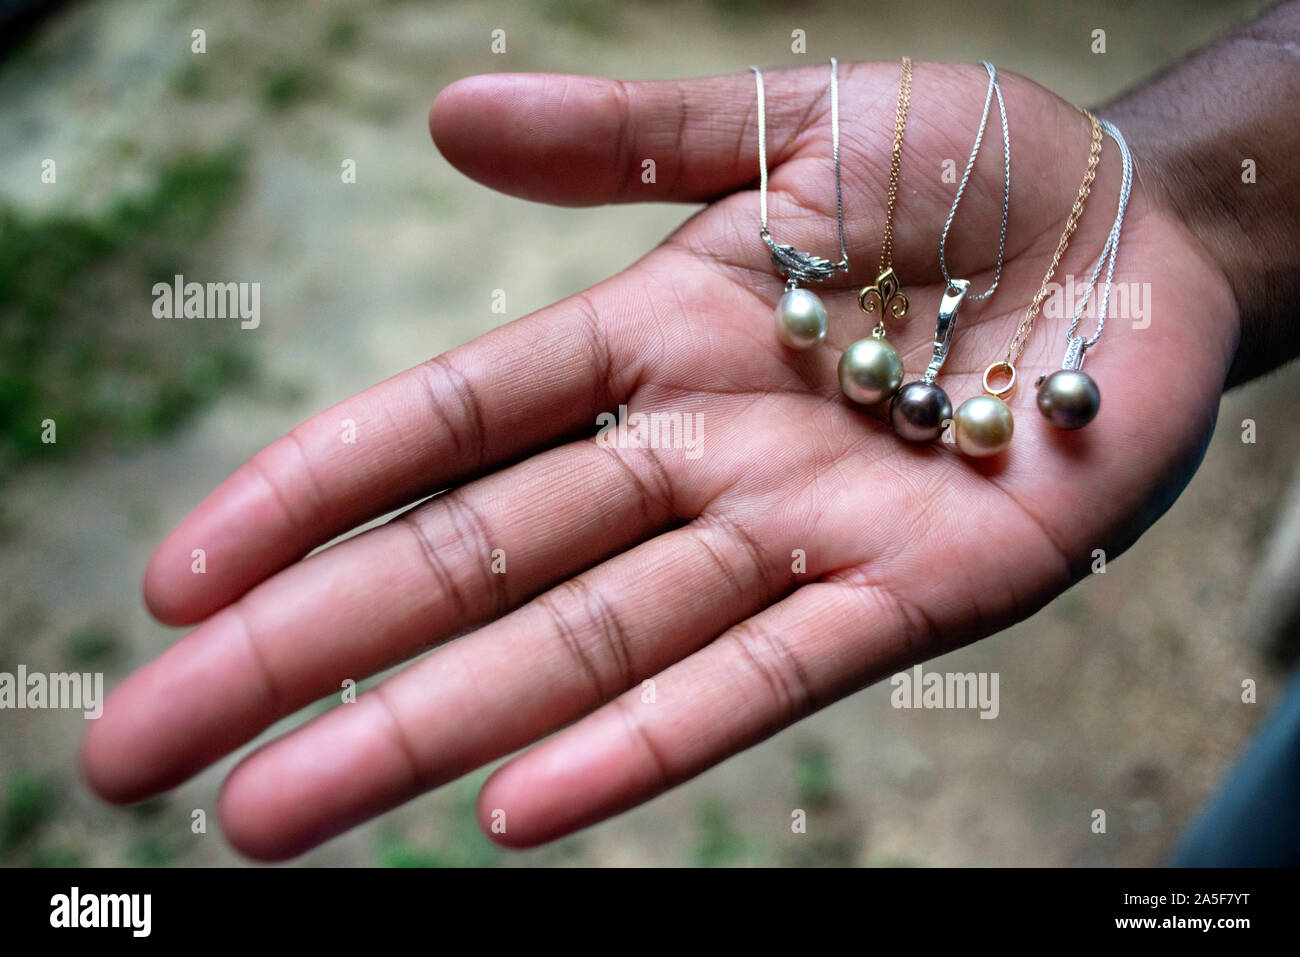 Hands holds a selection of raw Fiji Black lip oyster black pearls.  Mamanucas island group Fiji Stock Photo